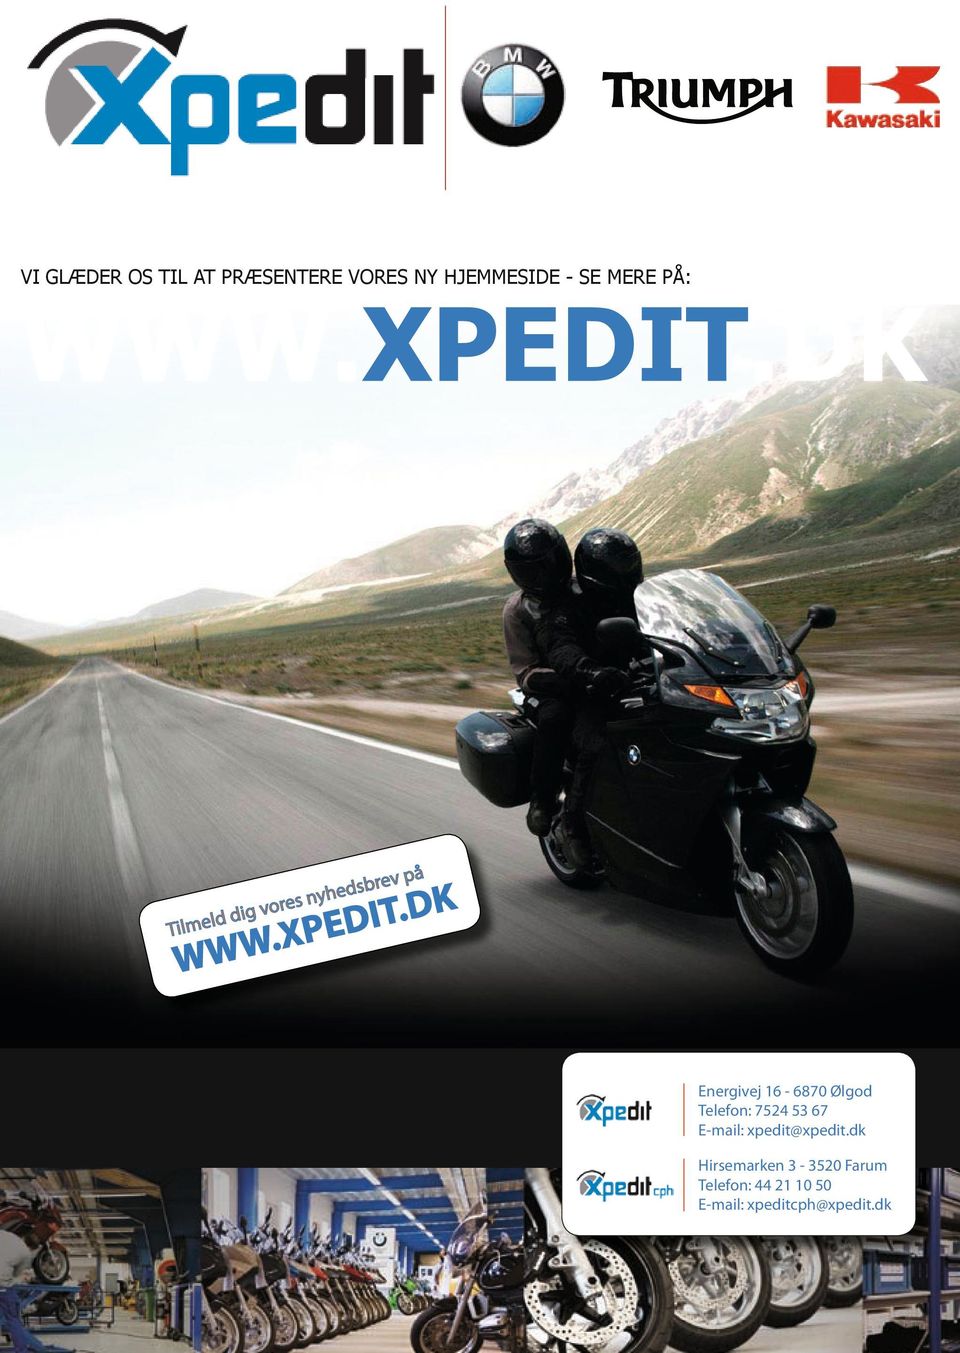 53 67 E-mail: xpedit@xpedit.